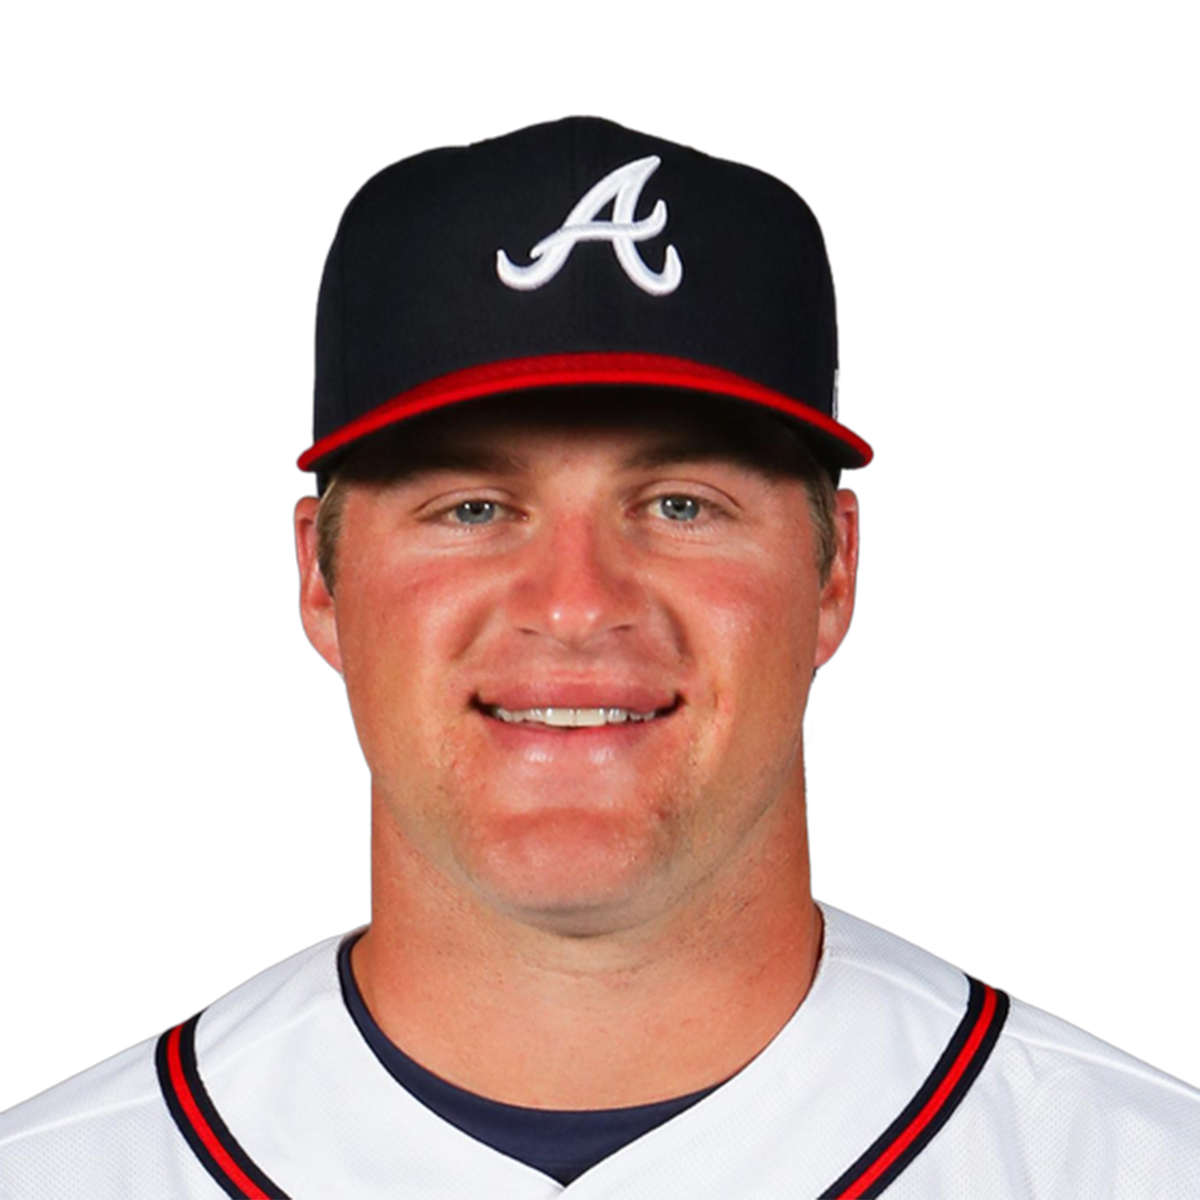 Bryce Elder to make his MLB debut for the Atlanta Braves on Tuesday